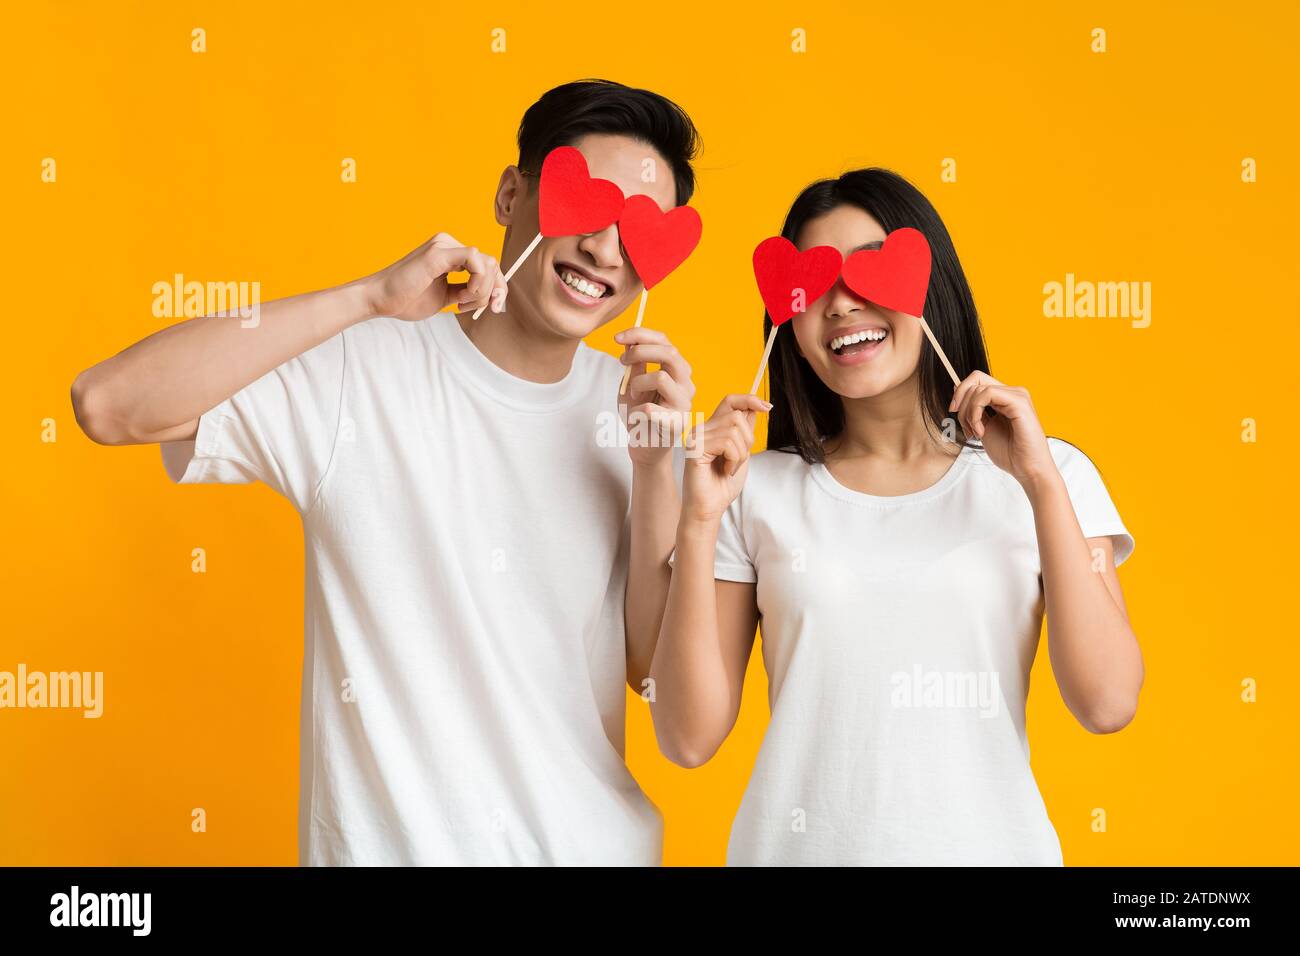 Young asian couple holding red love hearts over eyes Stock Photo